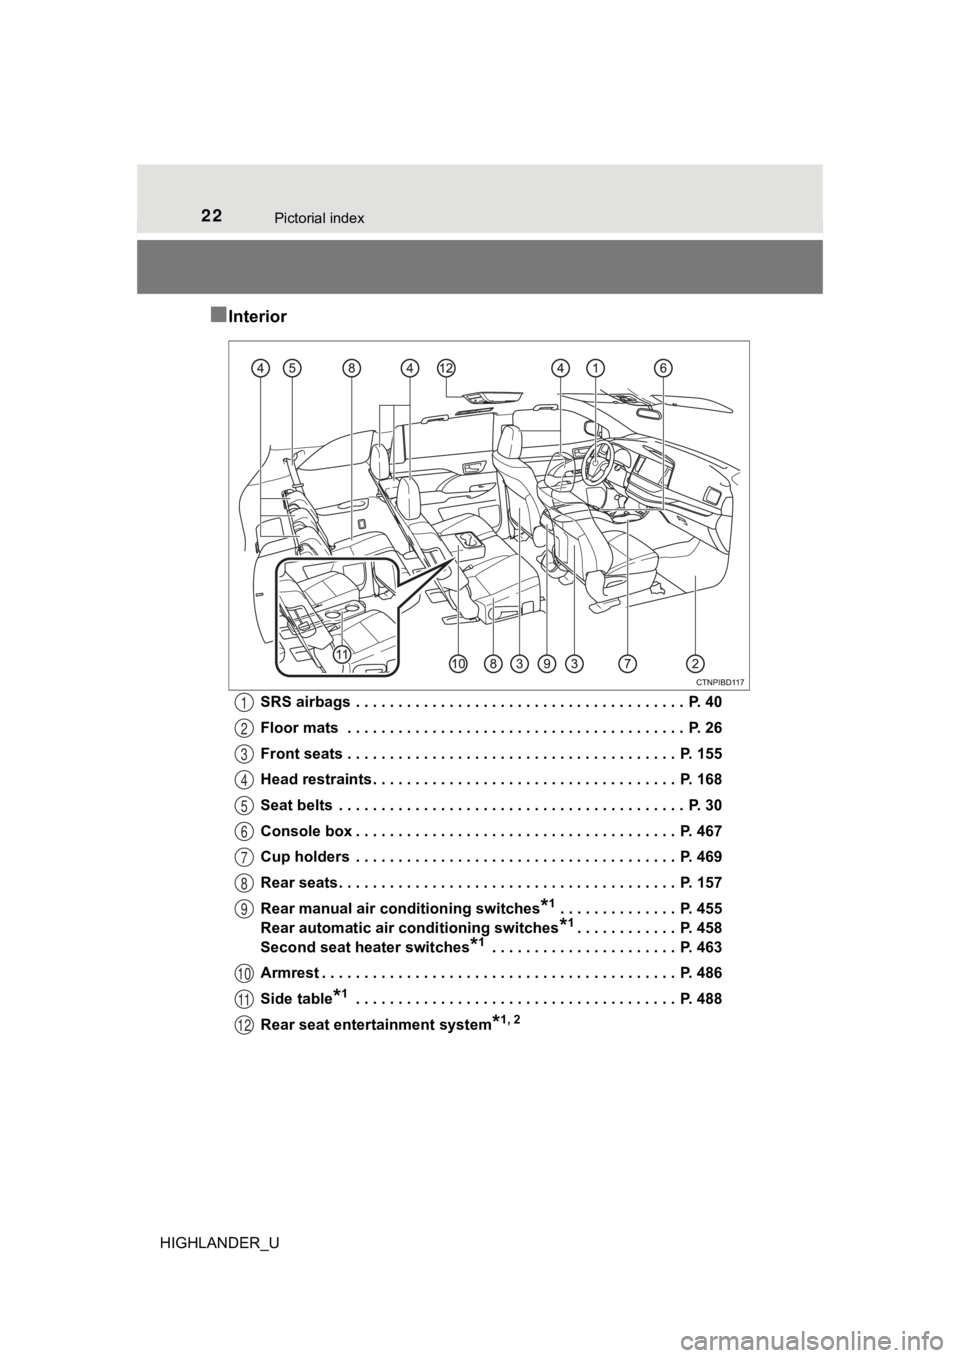 TOYOTA HIGHLANDER 2019  Owners Manual (in English) 22Pictorial index
HIGHLANDER_U
■Interior
SRS airbags  . . . . . . . . . . . . . . . . . . . . . . . . . . . . . . . . . . . . . . .  P. 40
Floor mats  . . . . . . . . . . . . . . . . . . . . . . . .